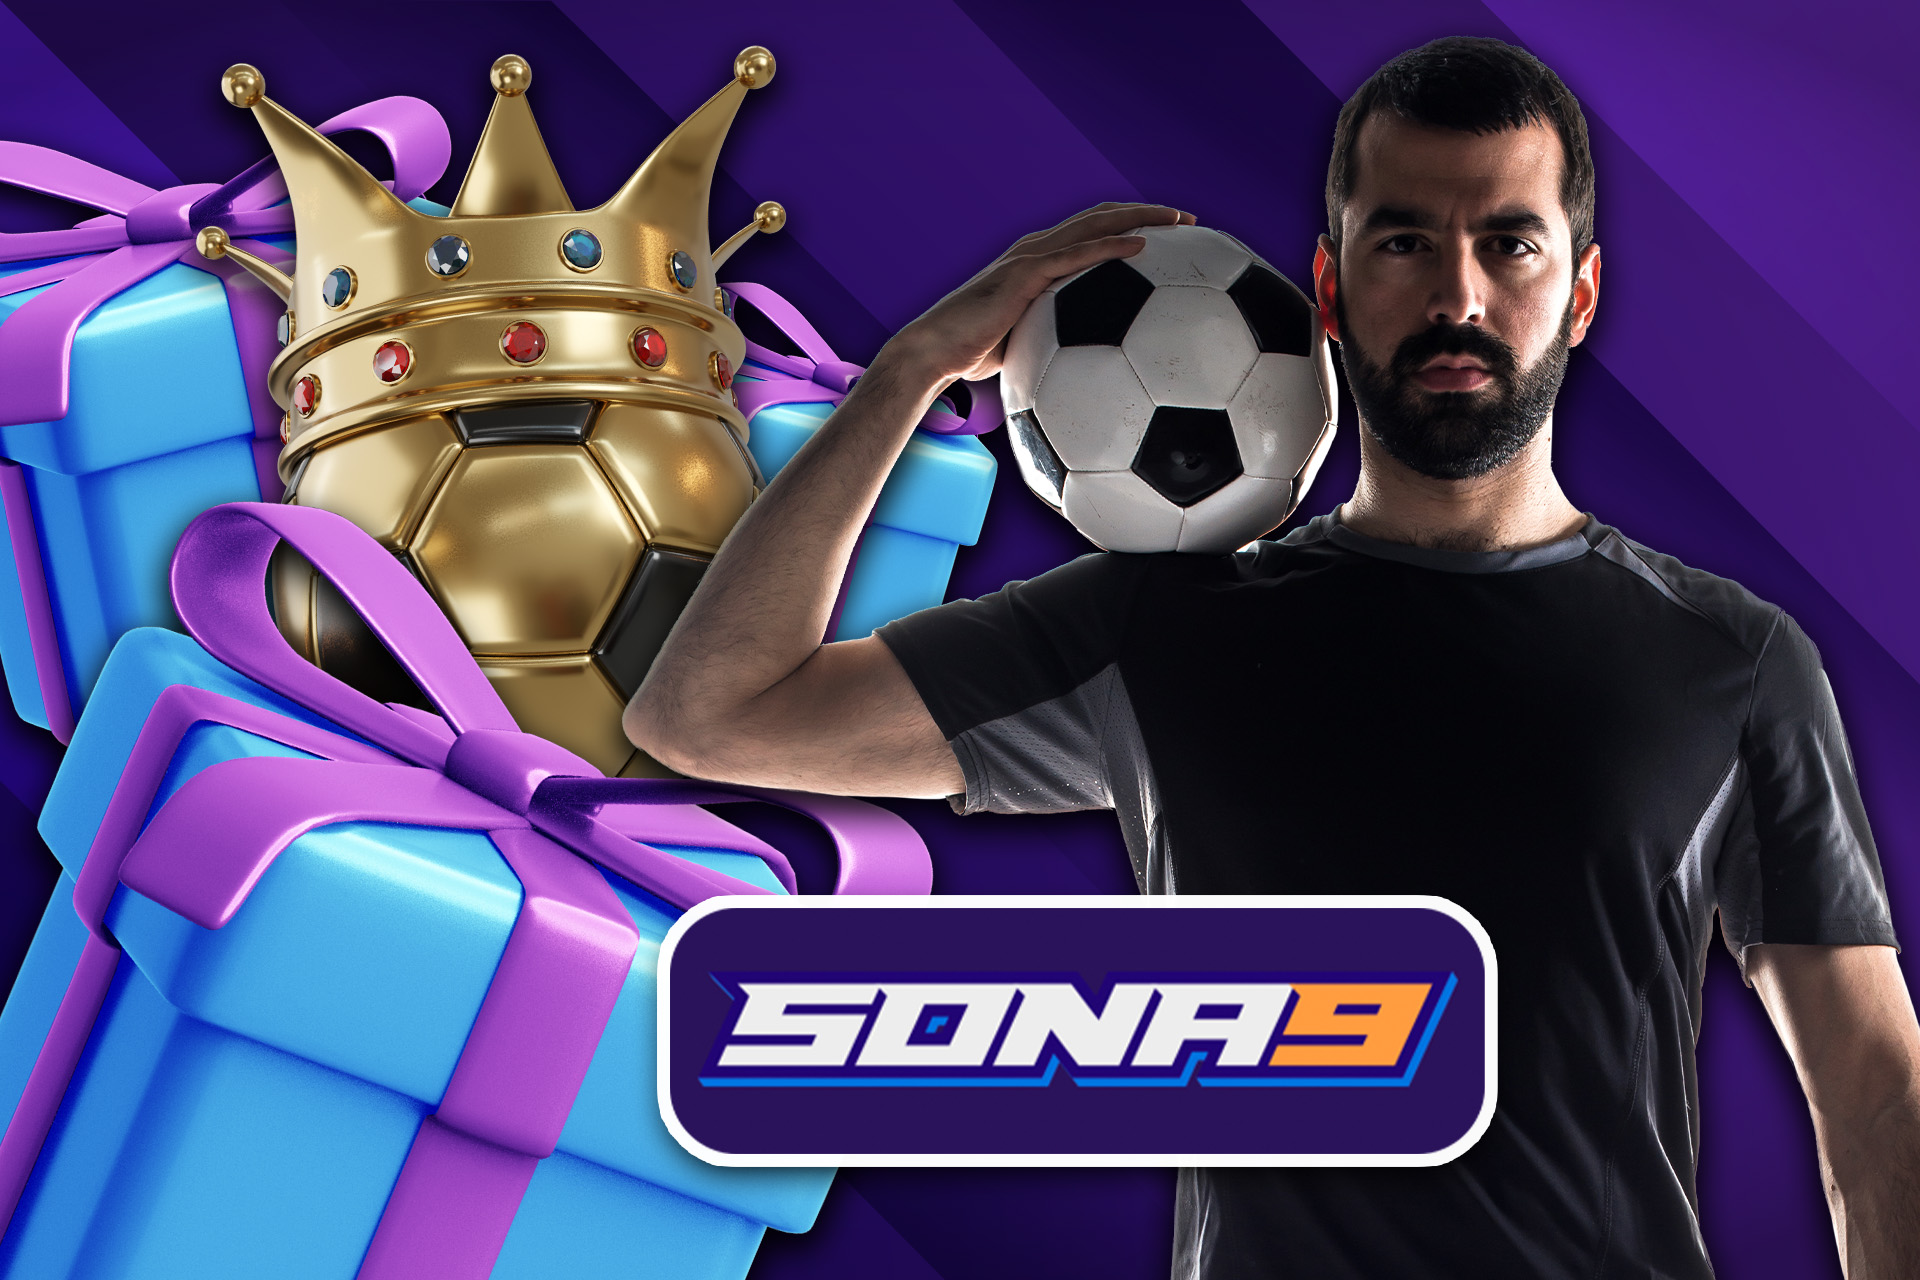 Sona9 offers lucrative bonuses for both new and regular players.